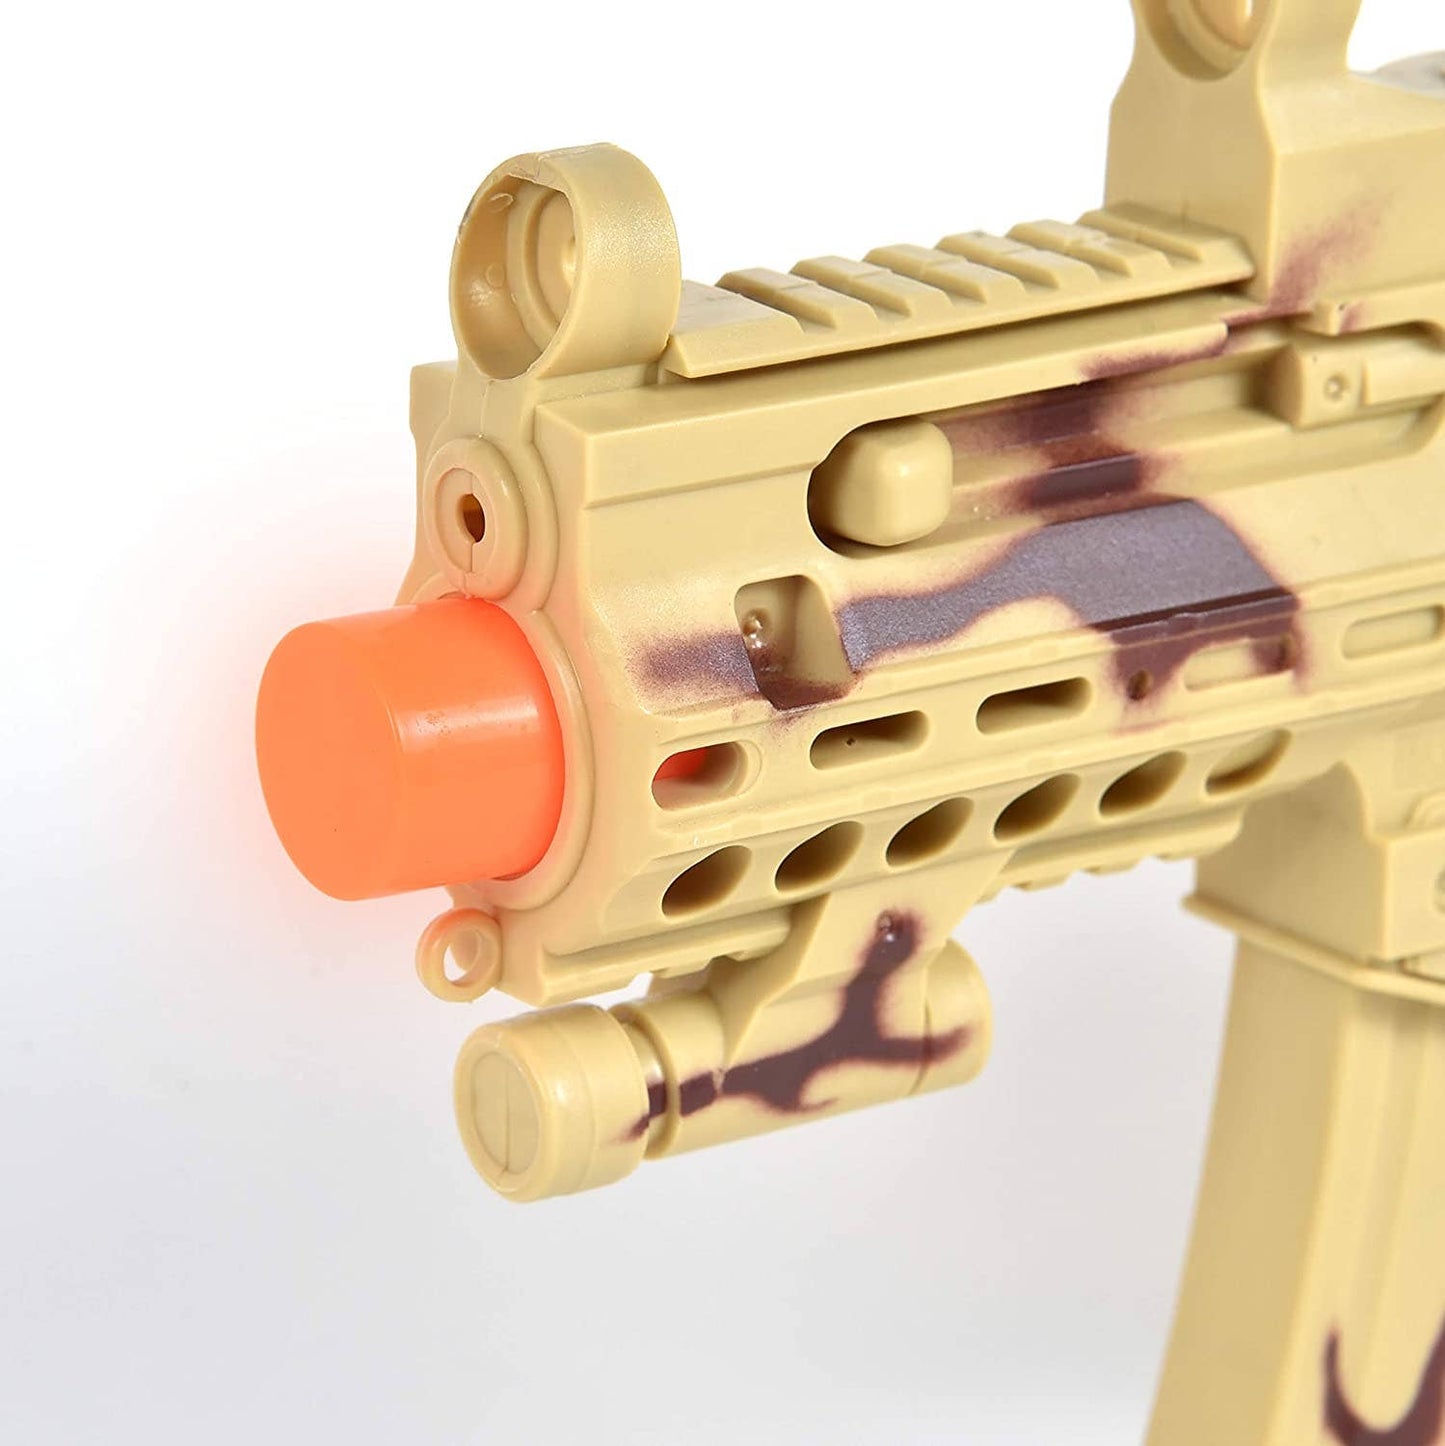 Maxx Action Machine Blaster Lights and Sounds Toy